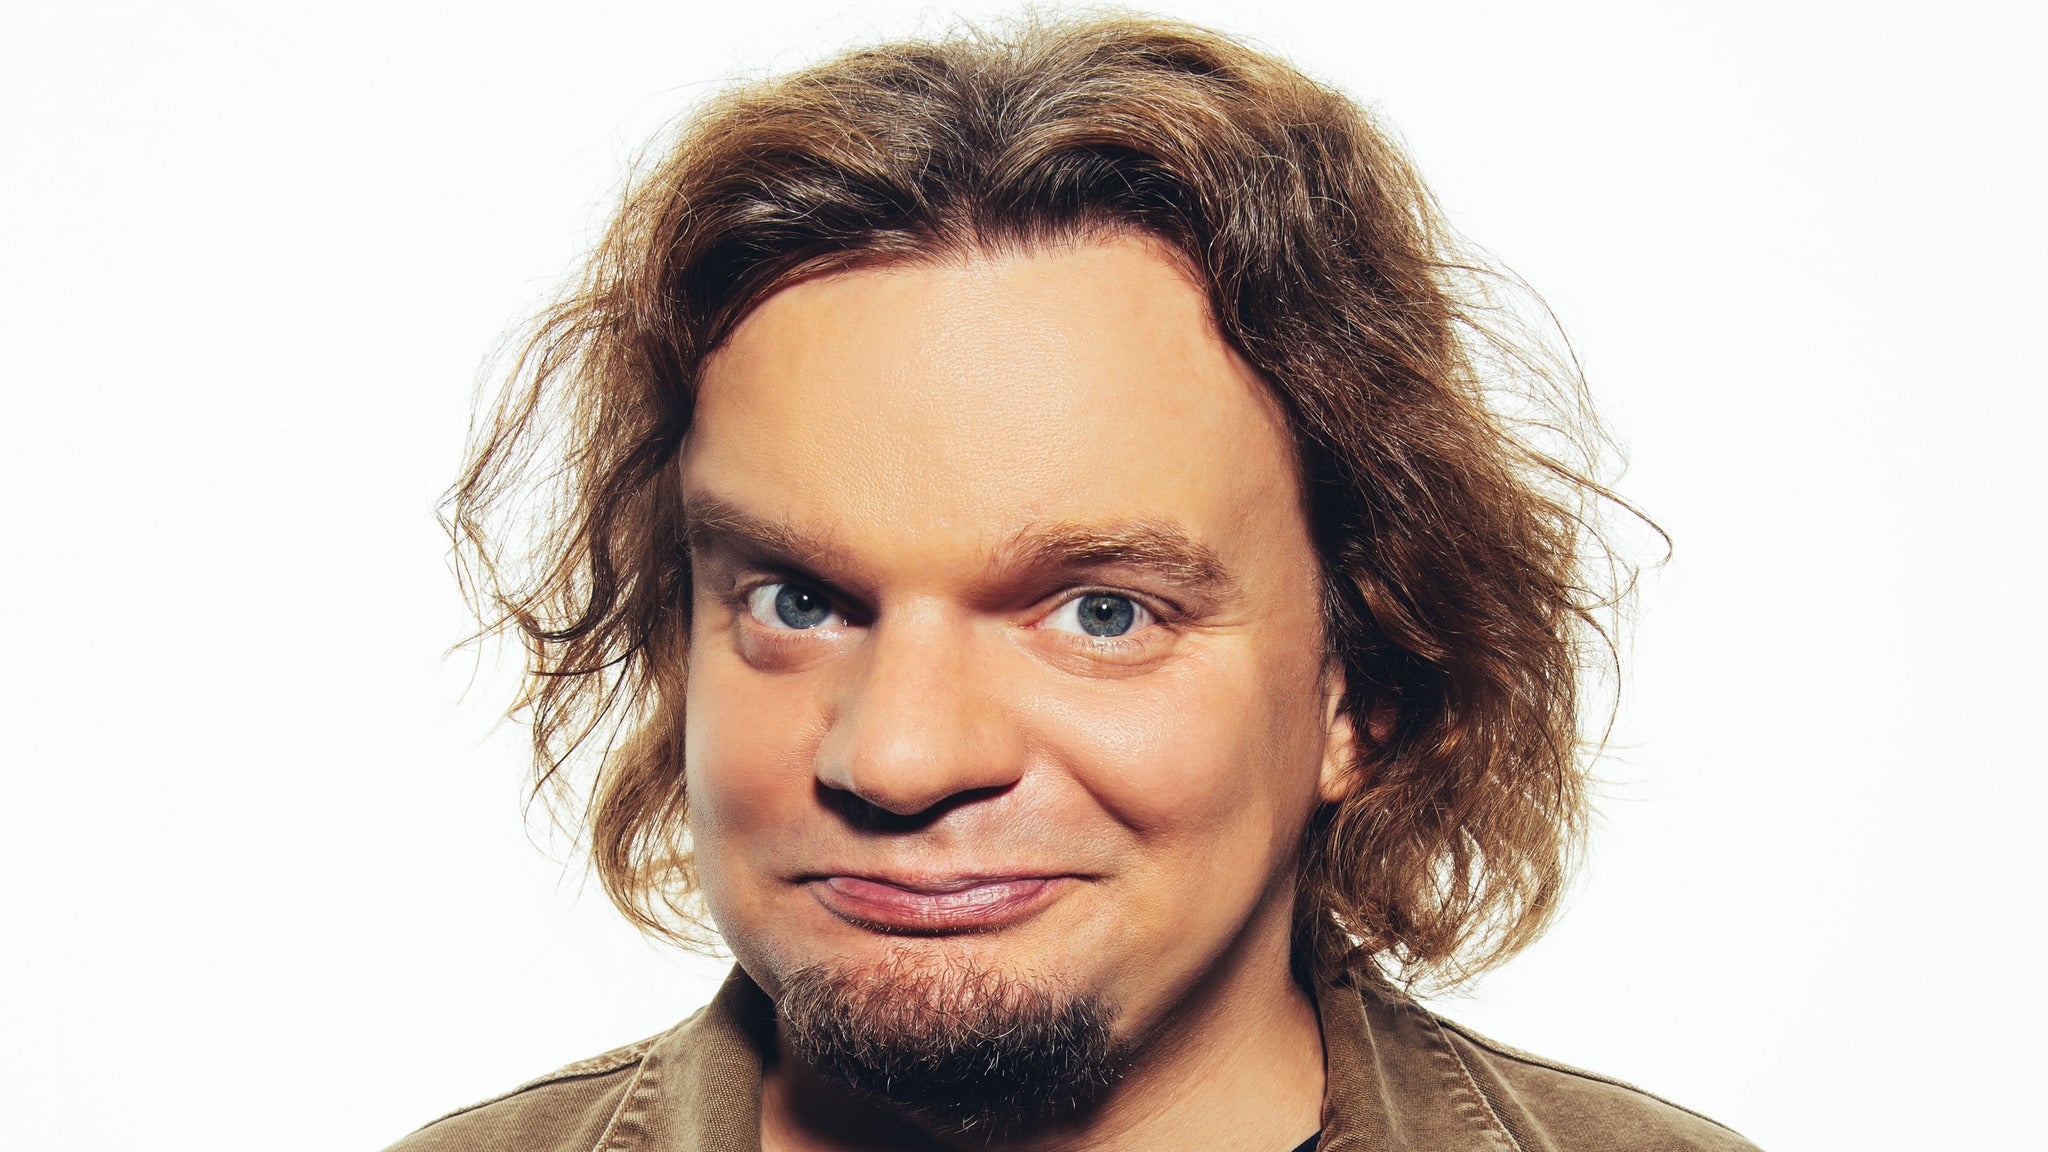 Image used with permission from Ticketmaster | Ismo tickets